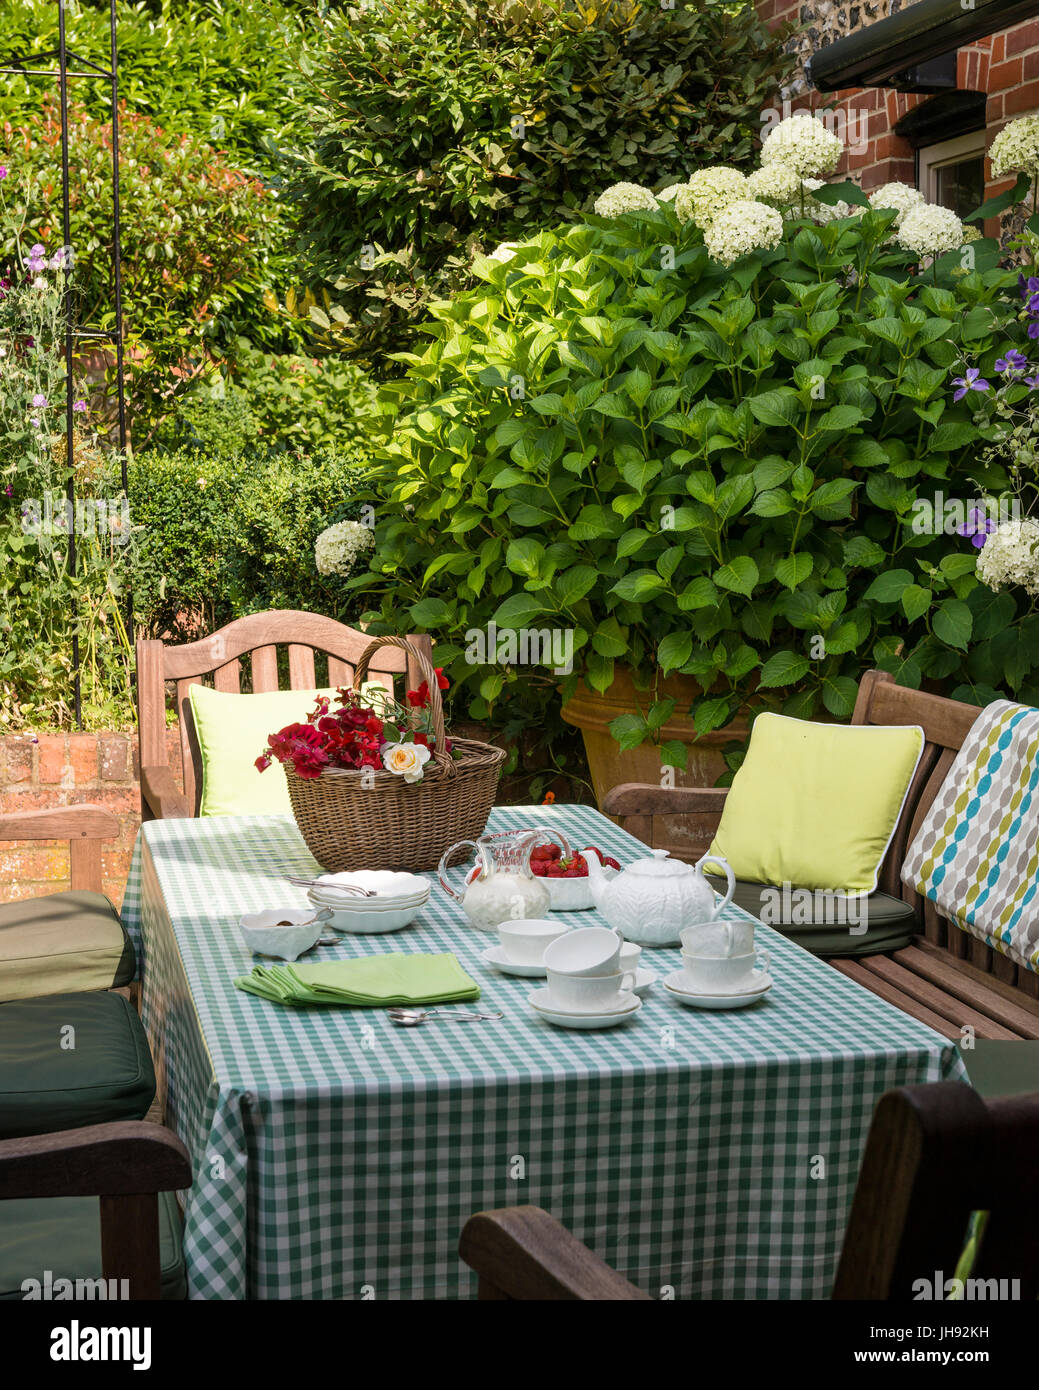 Afternoon tea on gingham tablecloth in garden Stock Photo